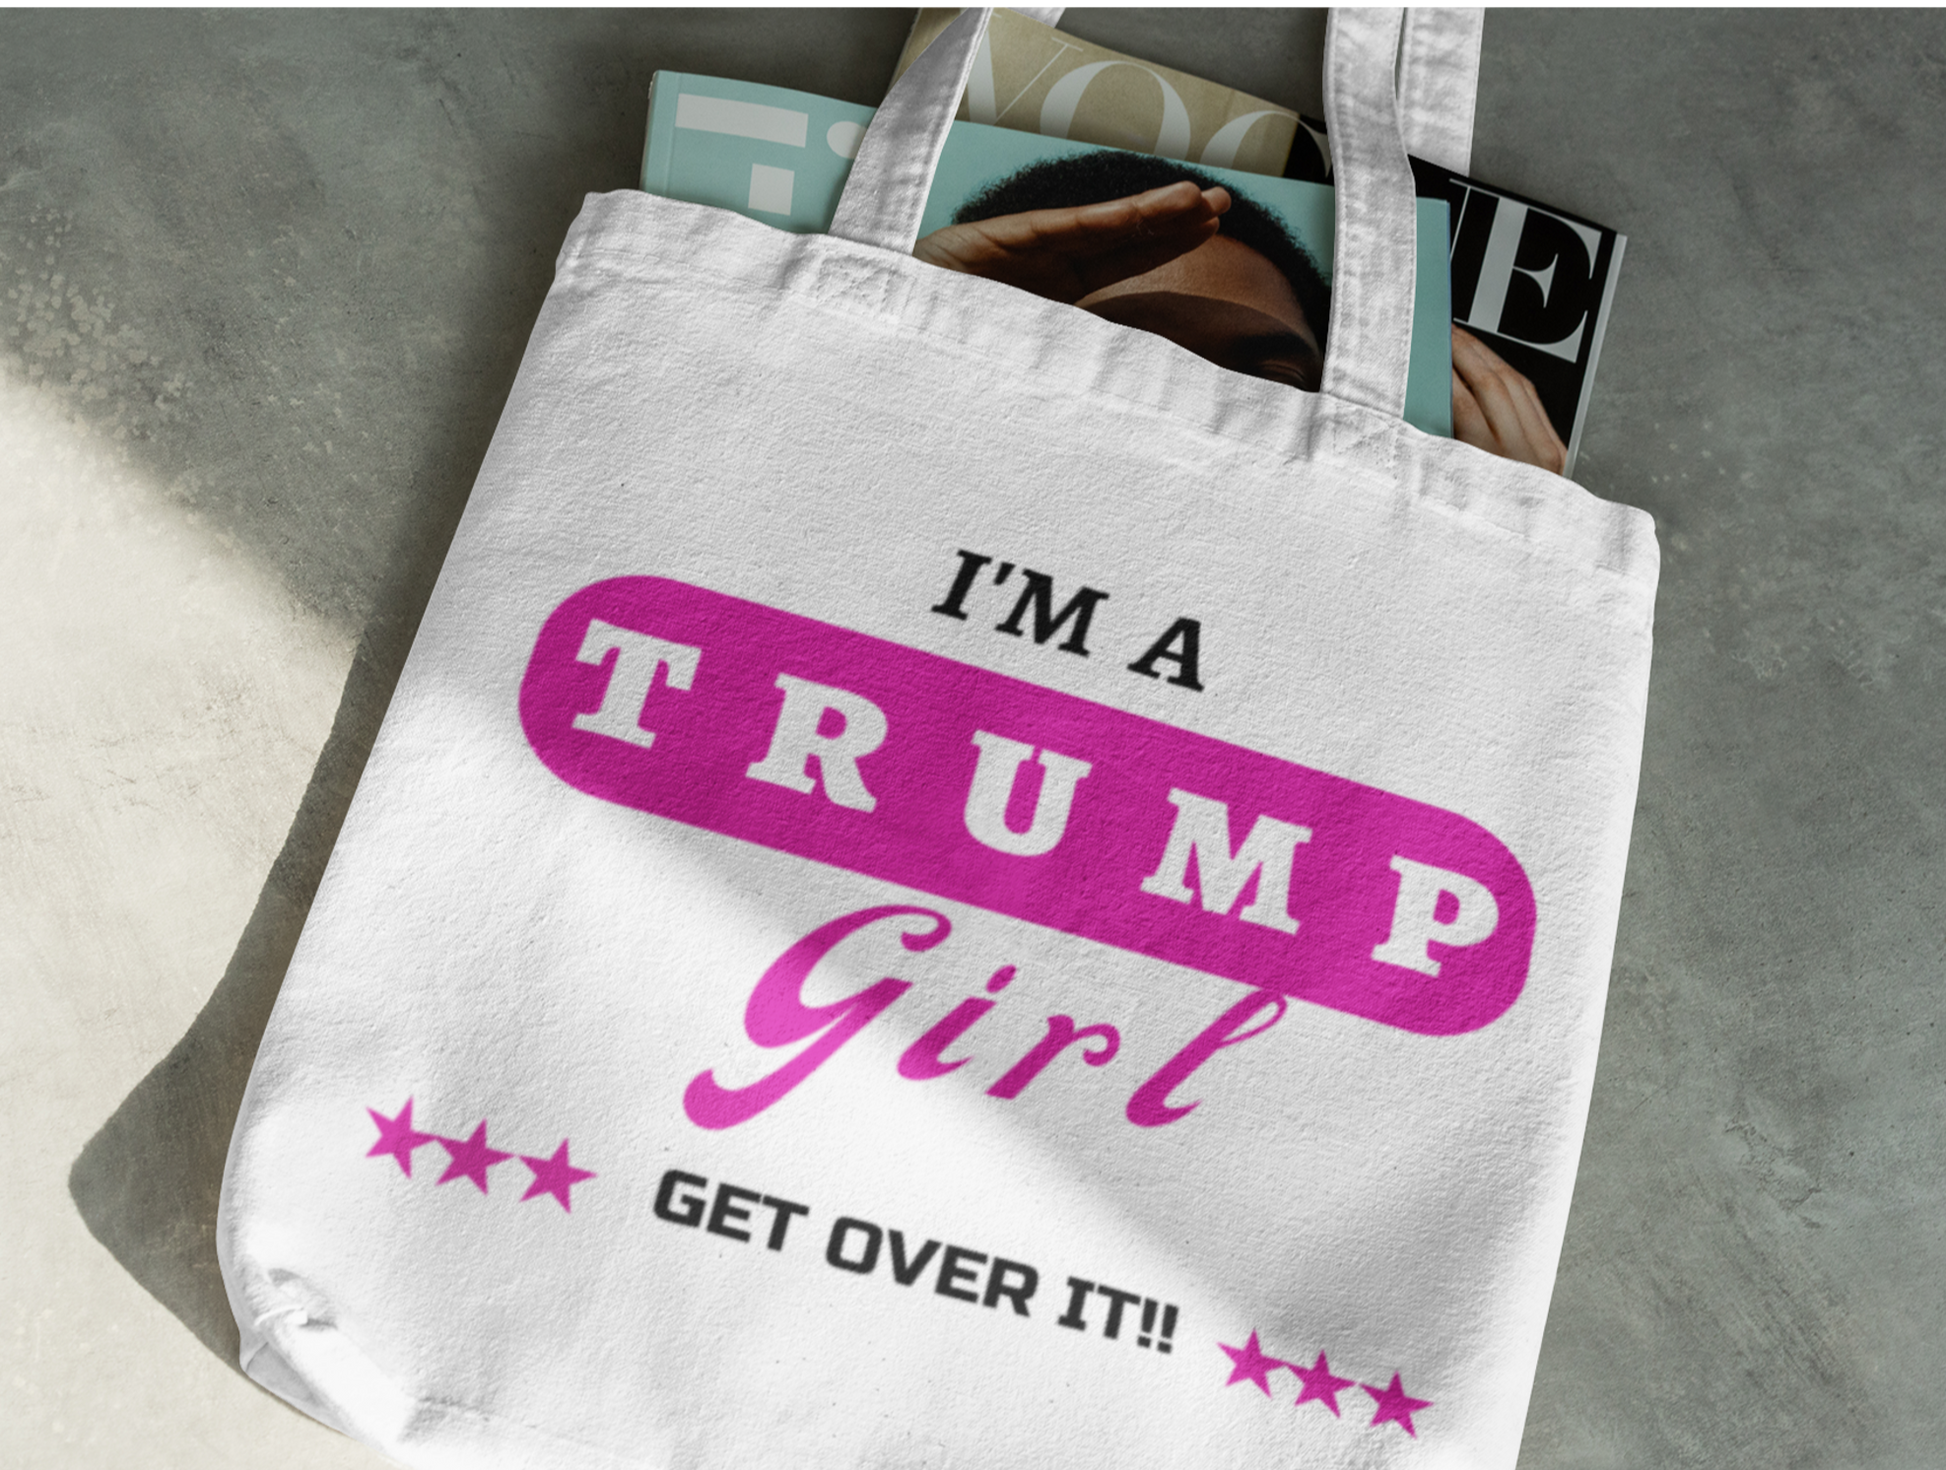 Trump Girl Tote Bag - The Right Side Prints